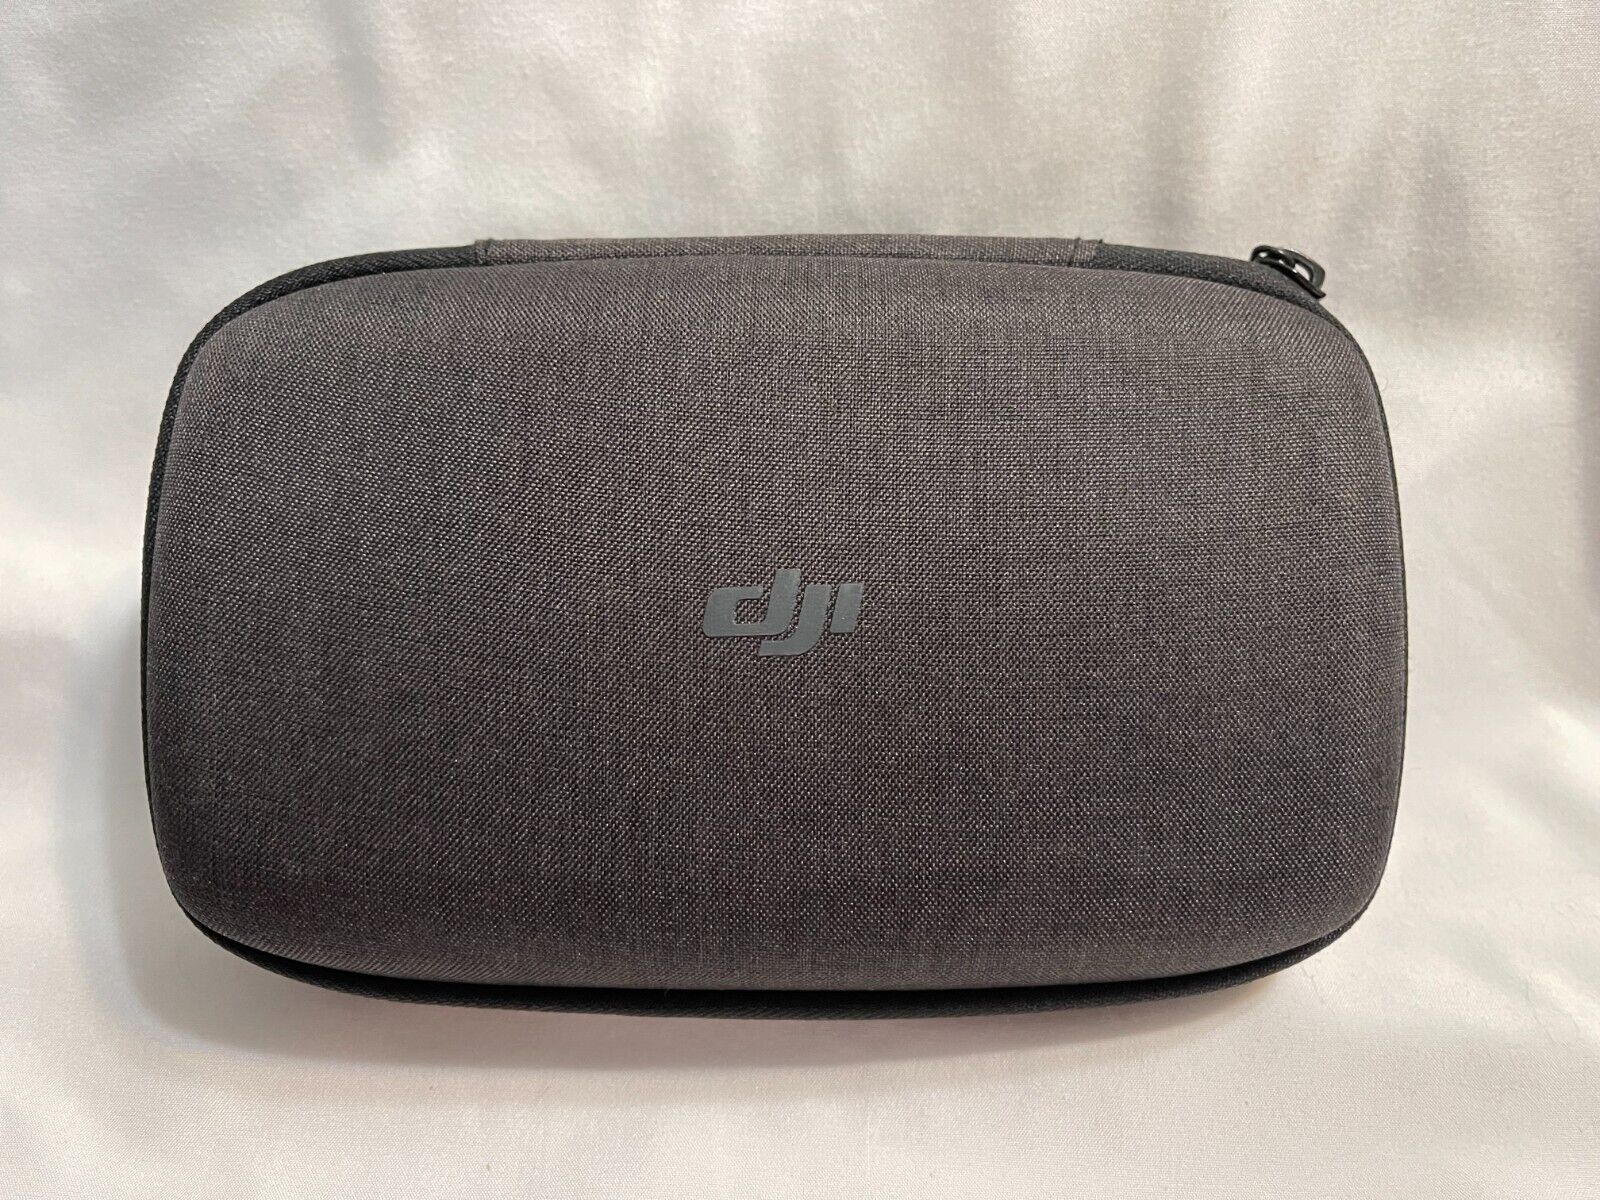 Dji Mavic Air Drone Genuine Carrying Case Pouch For The Drone